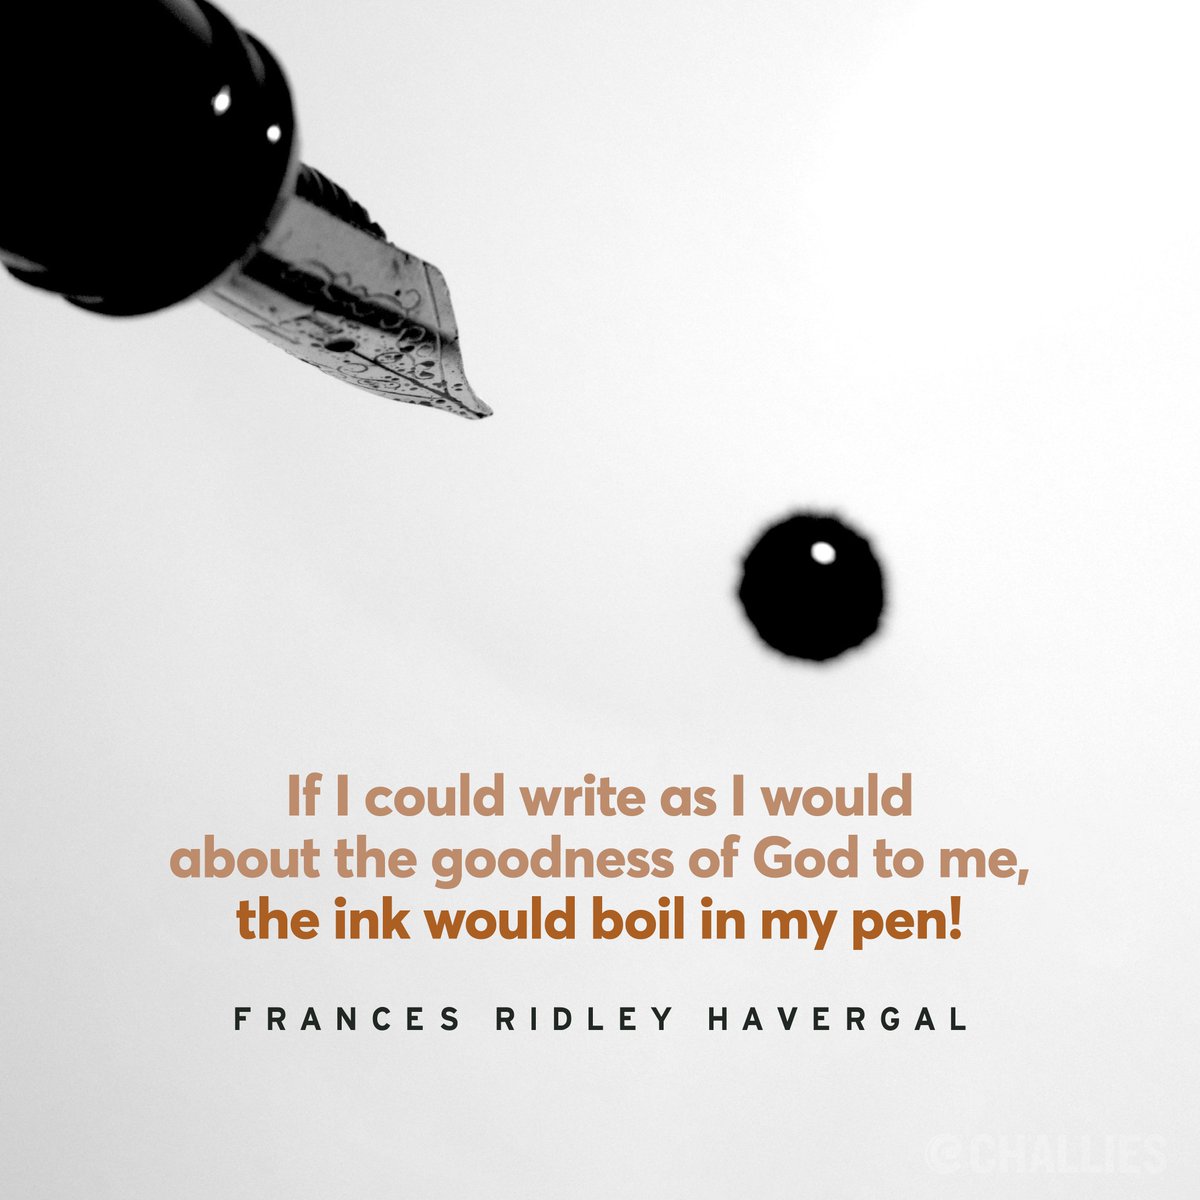 'If I could write as I would about the goodness of God to me, the ink would boil in my pen!' (Frances Ridley Havergal)